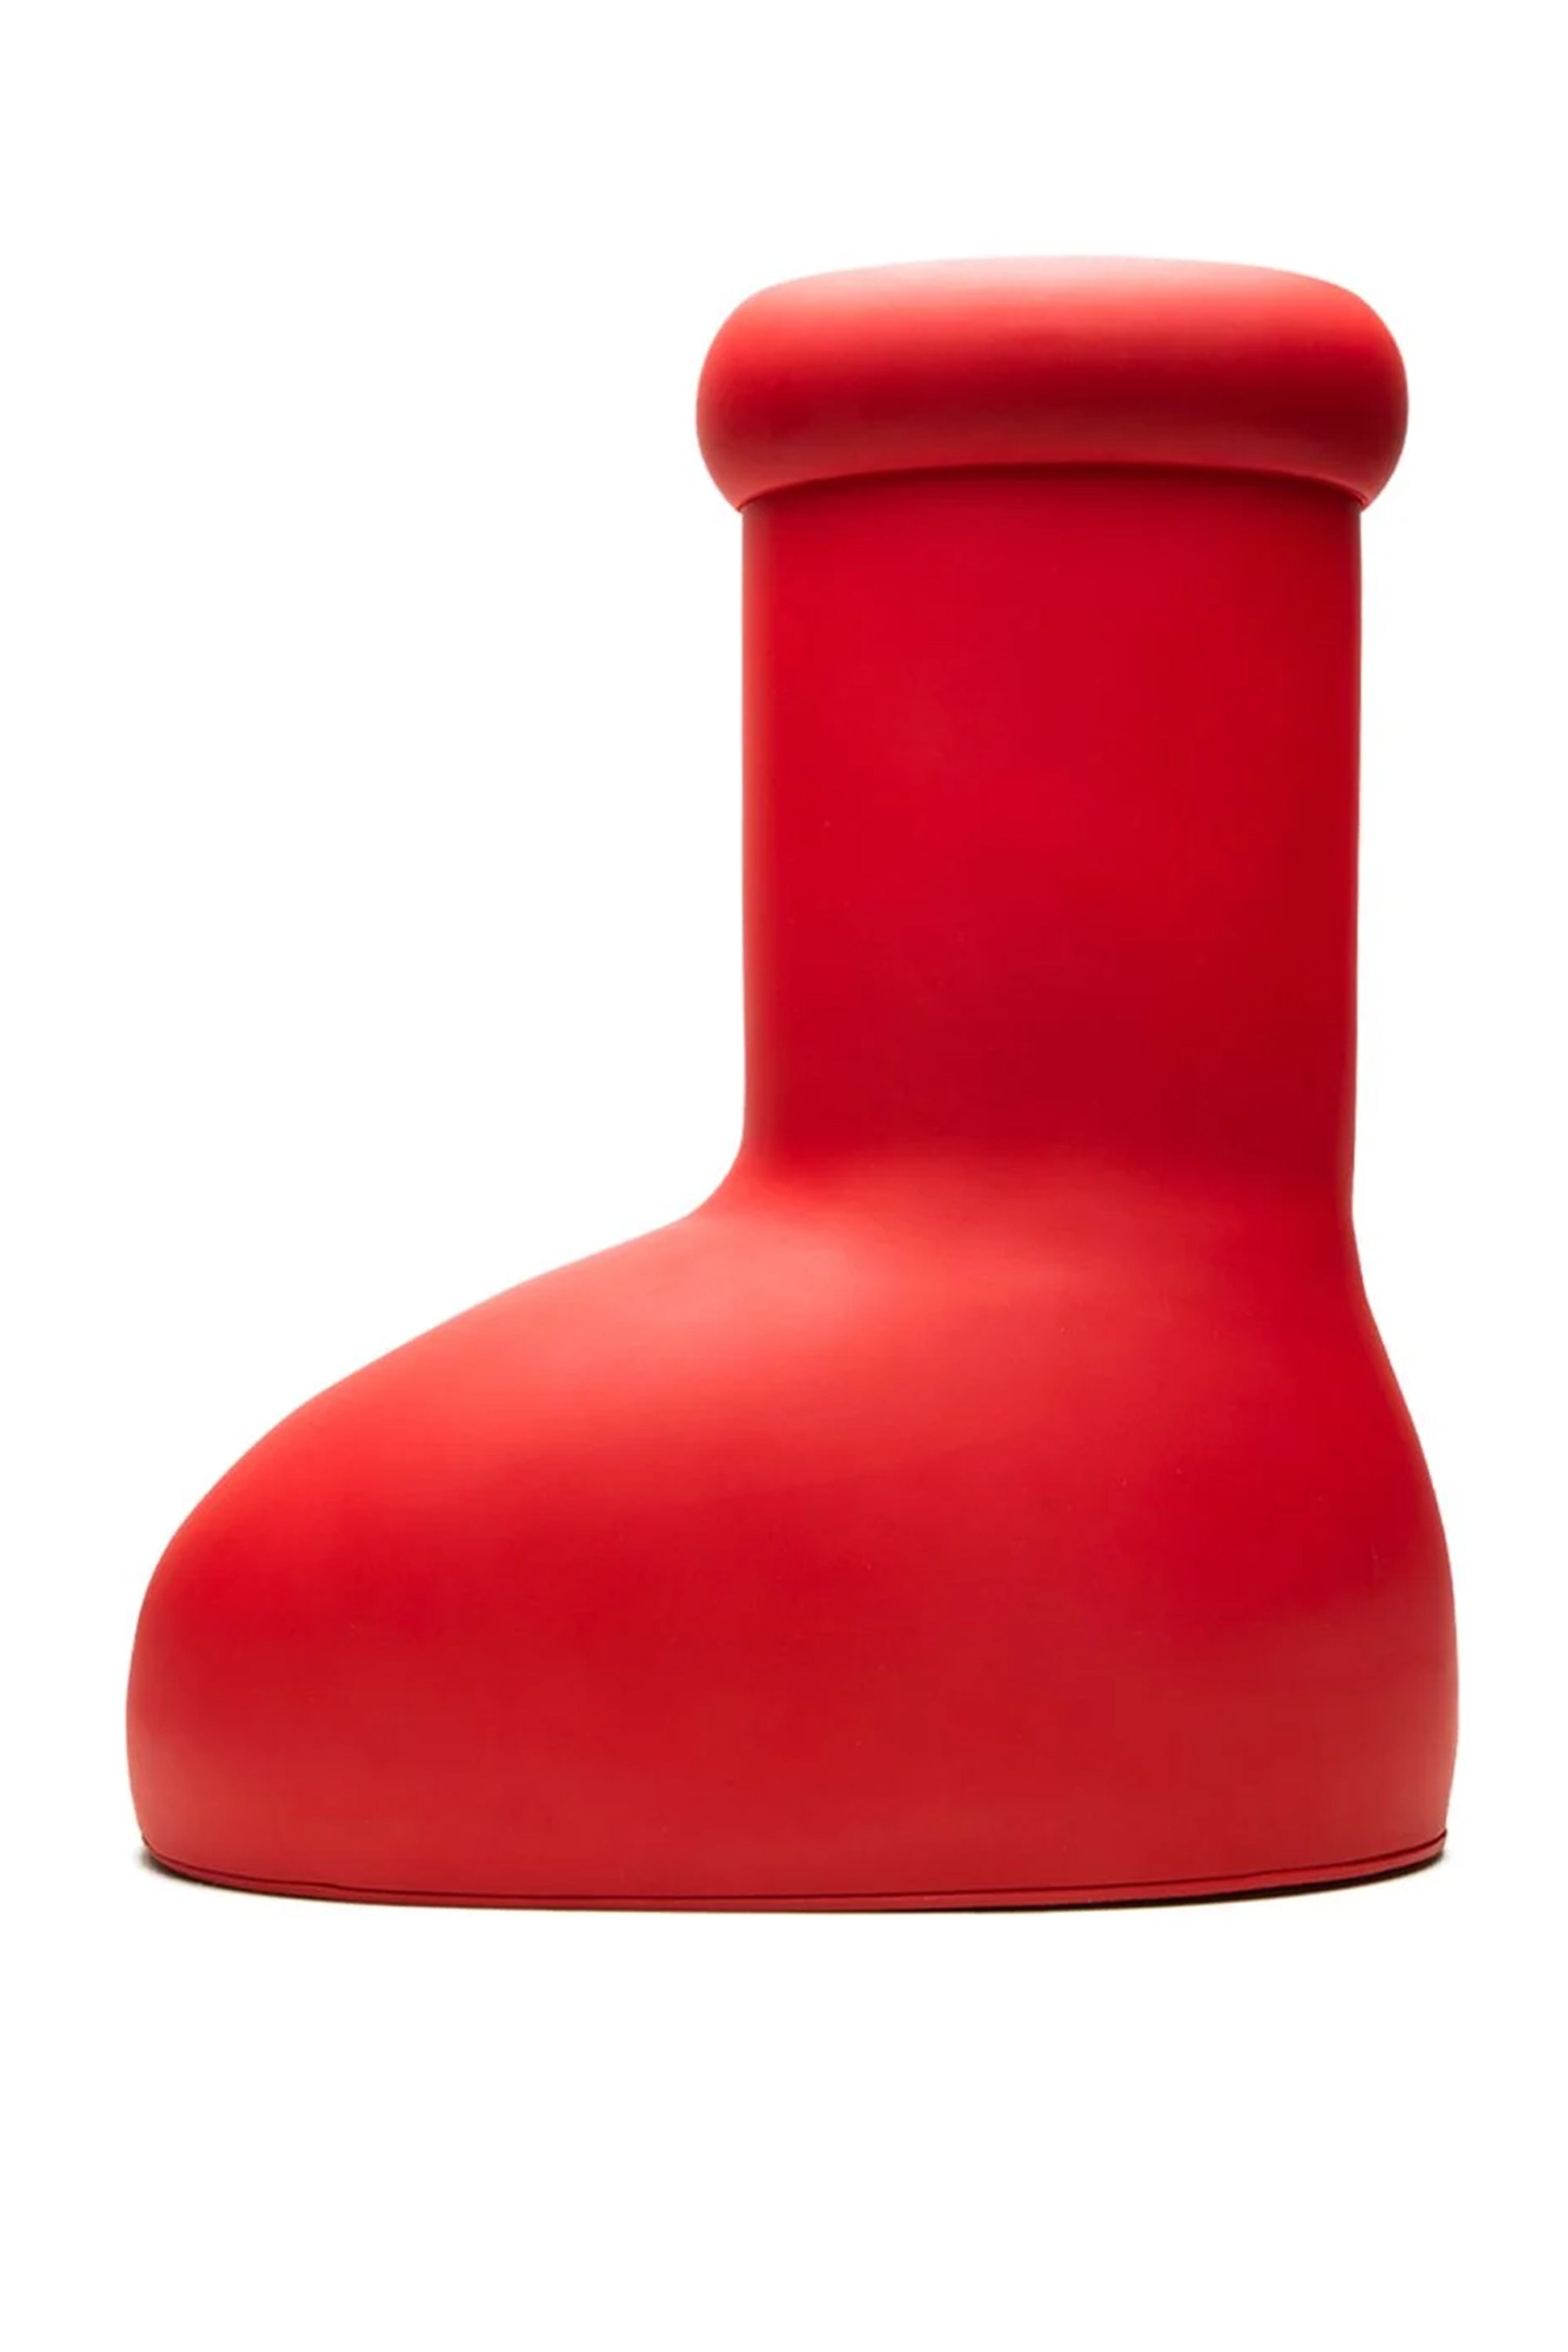 MSCHF SS23 BIG RED BOOTS / RED - NUBIAN